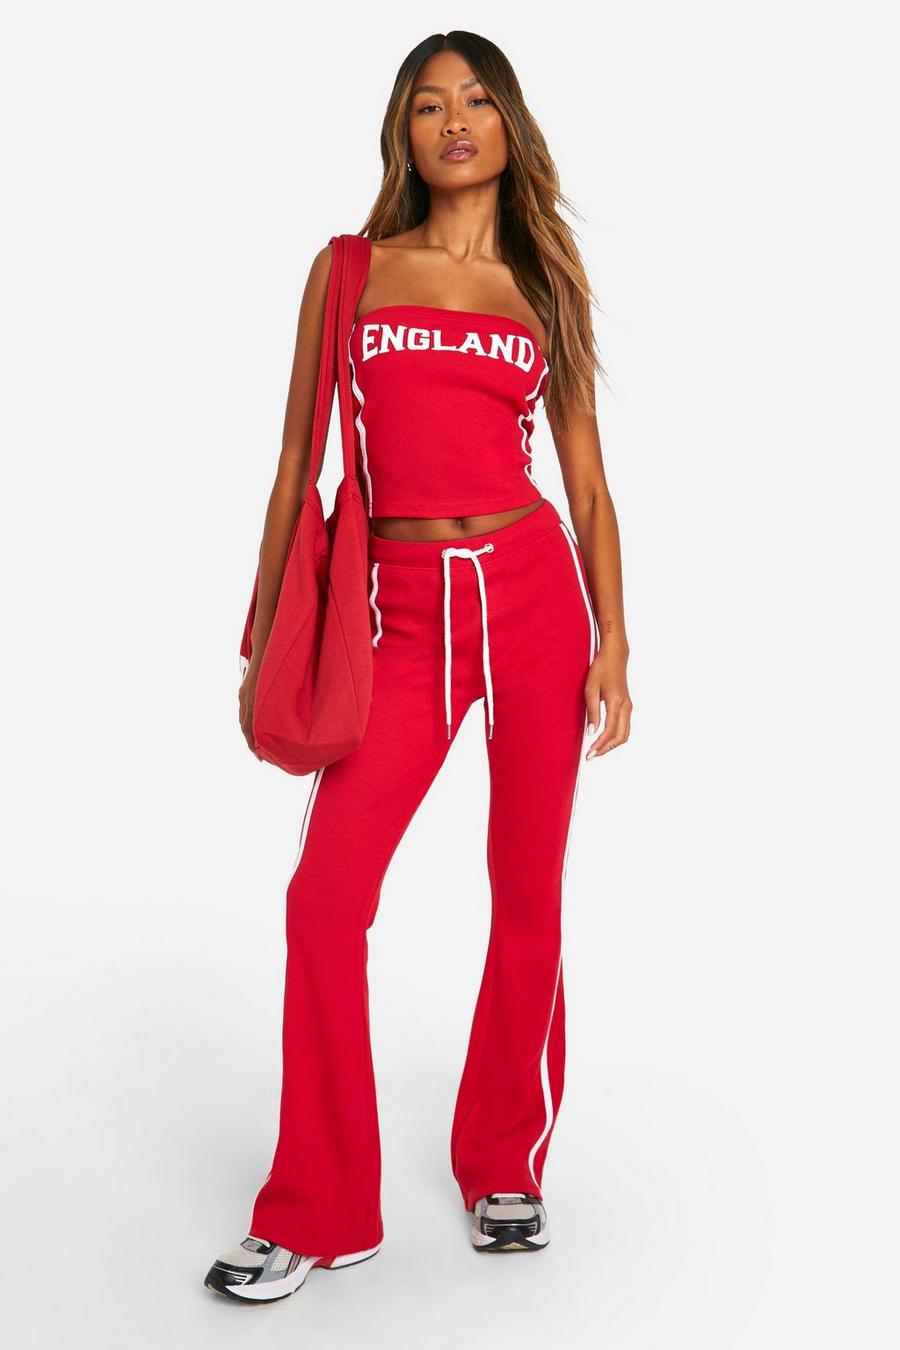 Red England Slogan Tube Top And Pants Set image number 1